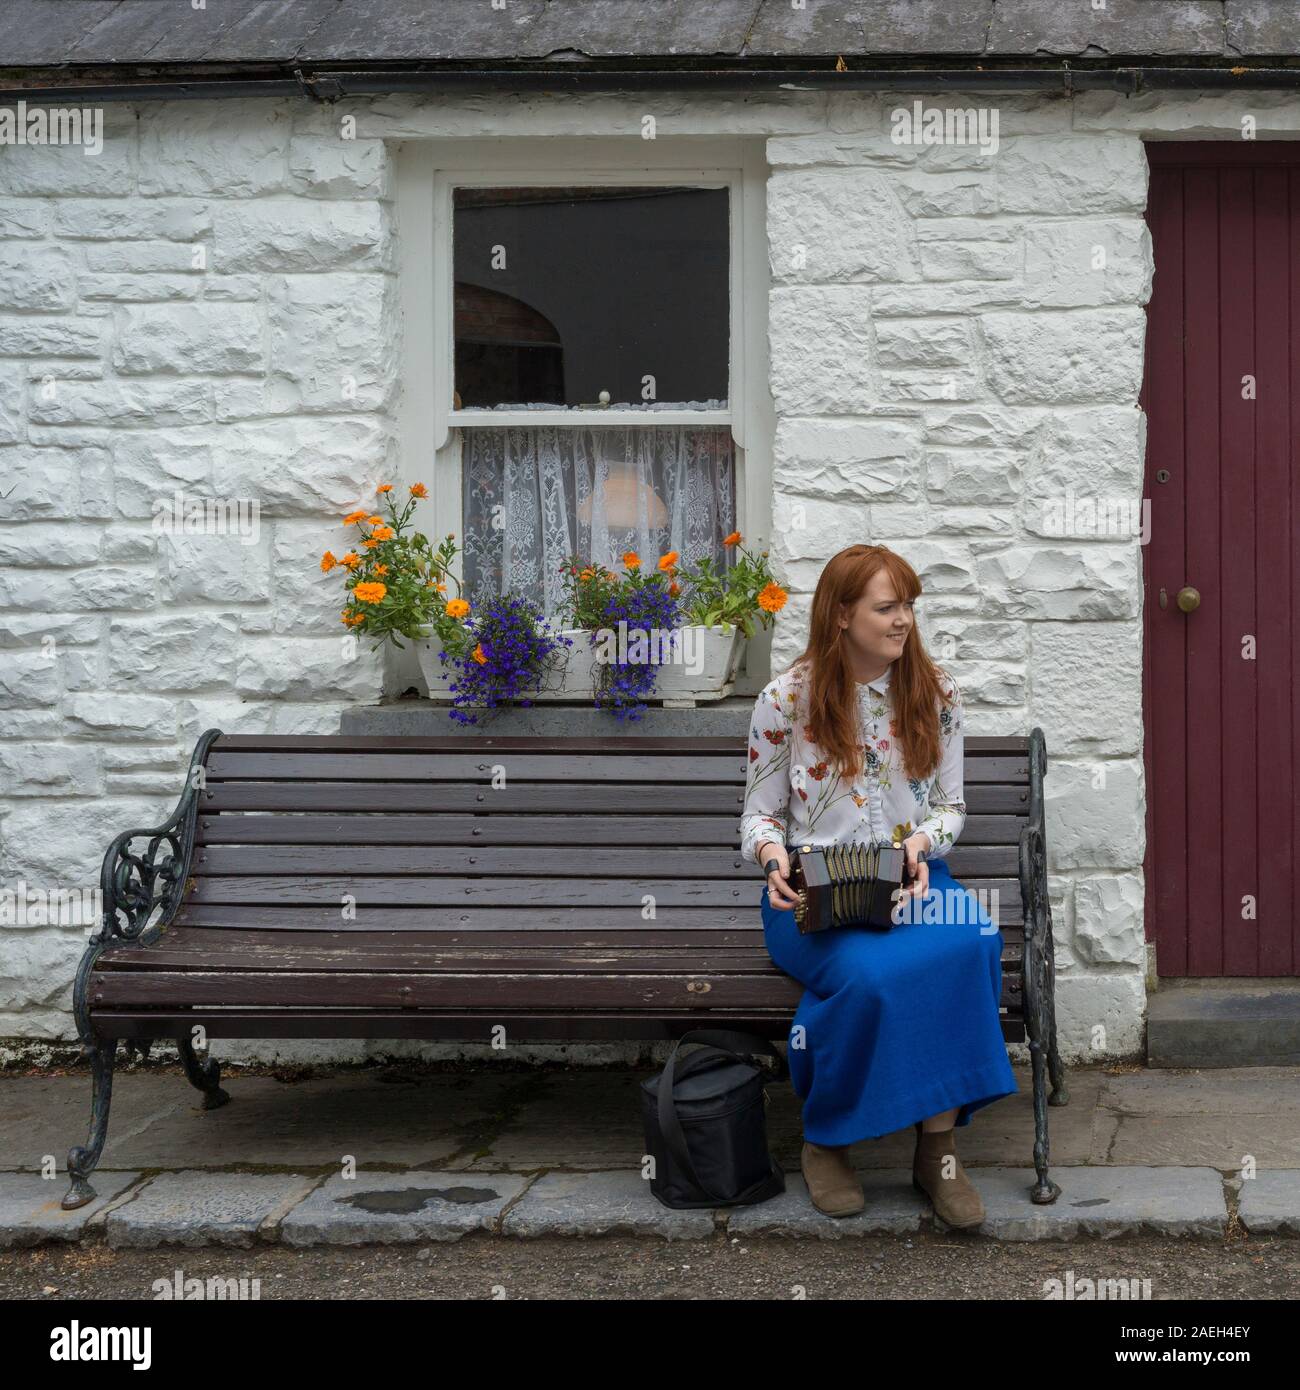 Woman playing Squeezebox outside store, Bunratty, County Clare, Republic of Ireland Stock Photo